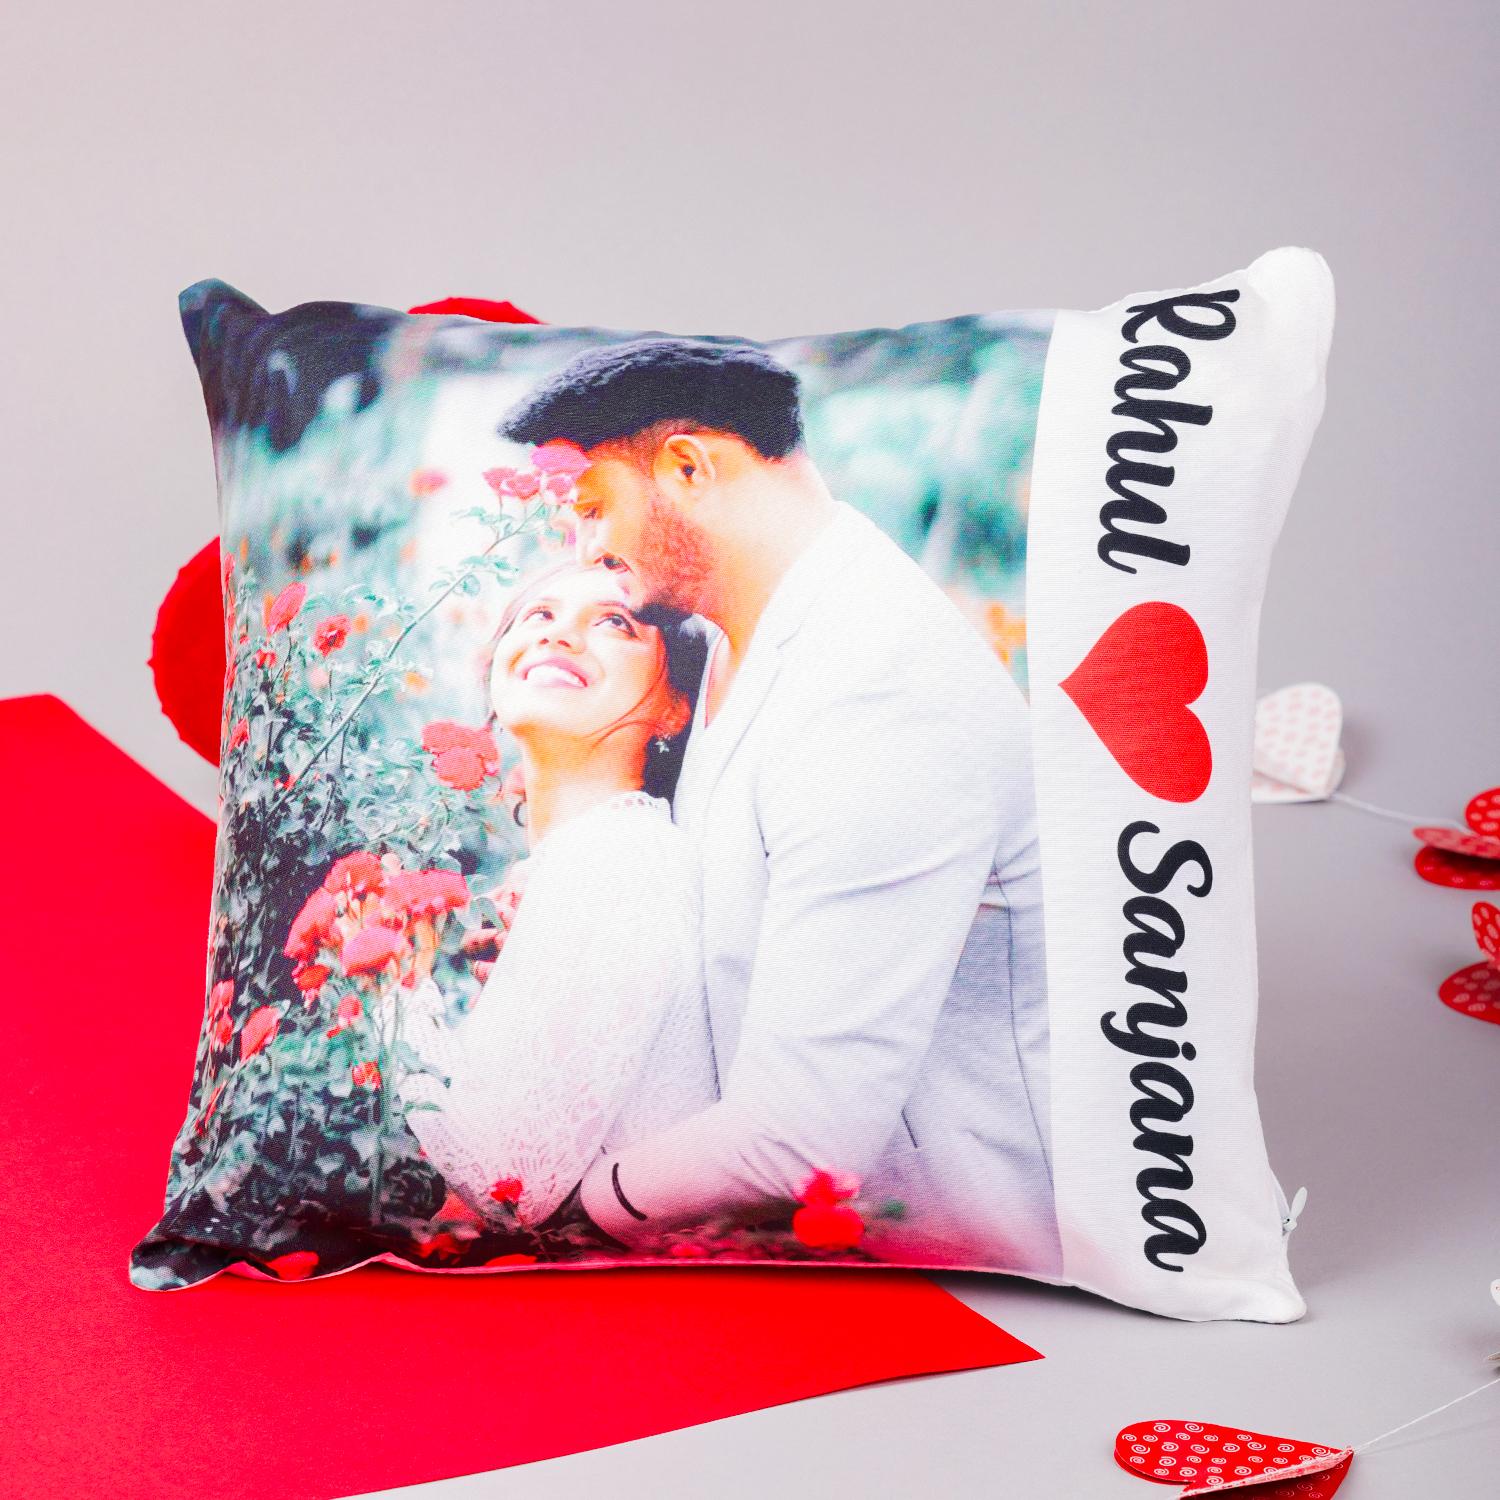 Buy or Order Cute Family Personalised Cushion Online | Midnight Gifts  Online - OyeGifts.com